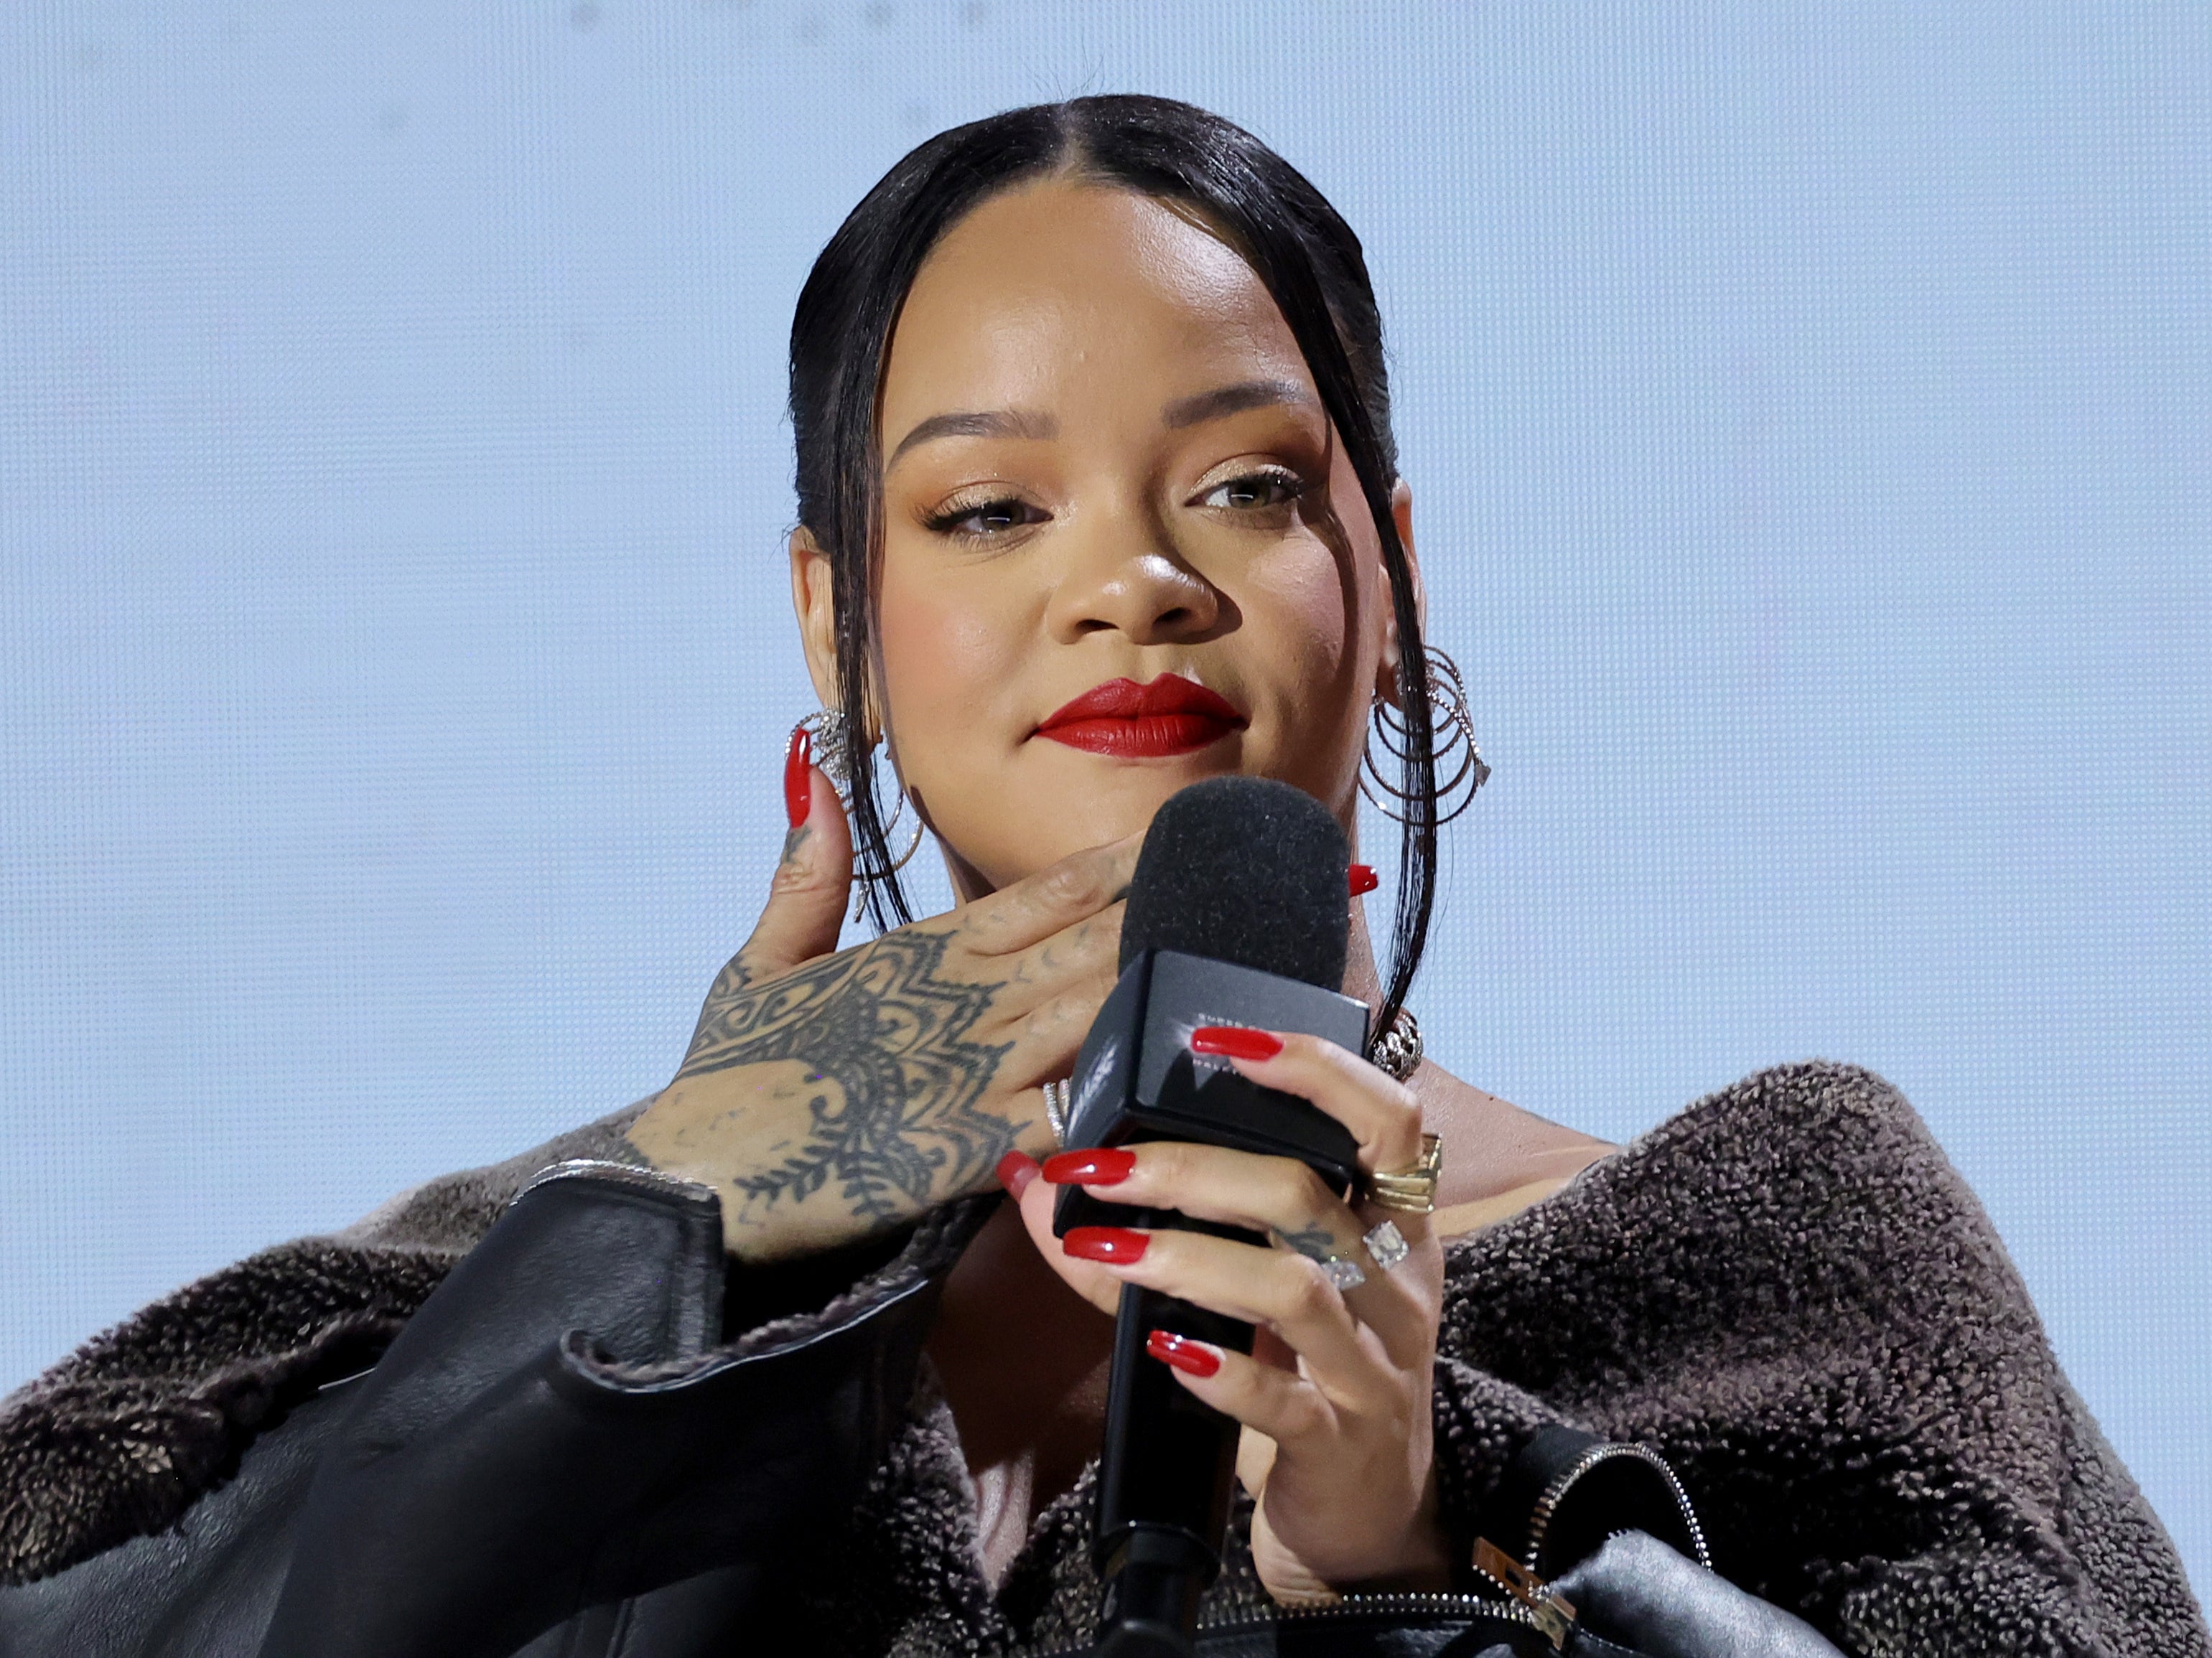 For Rihanna, balancing work and personal life has been almost 'impossible'